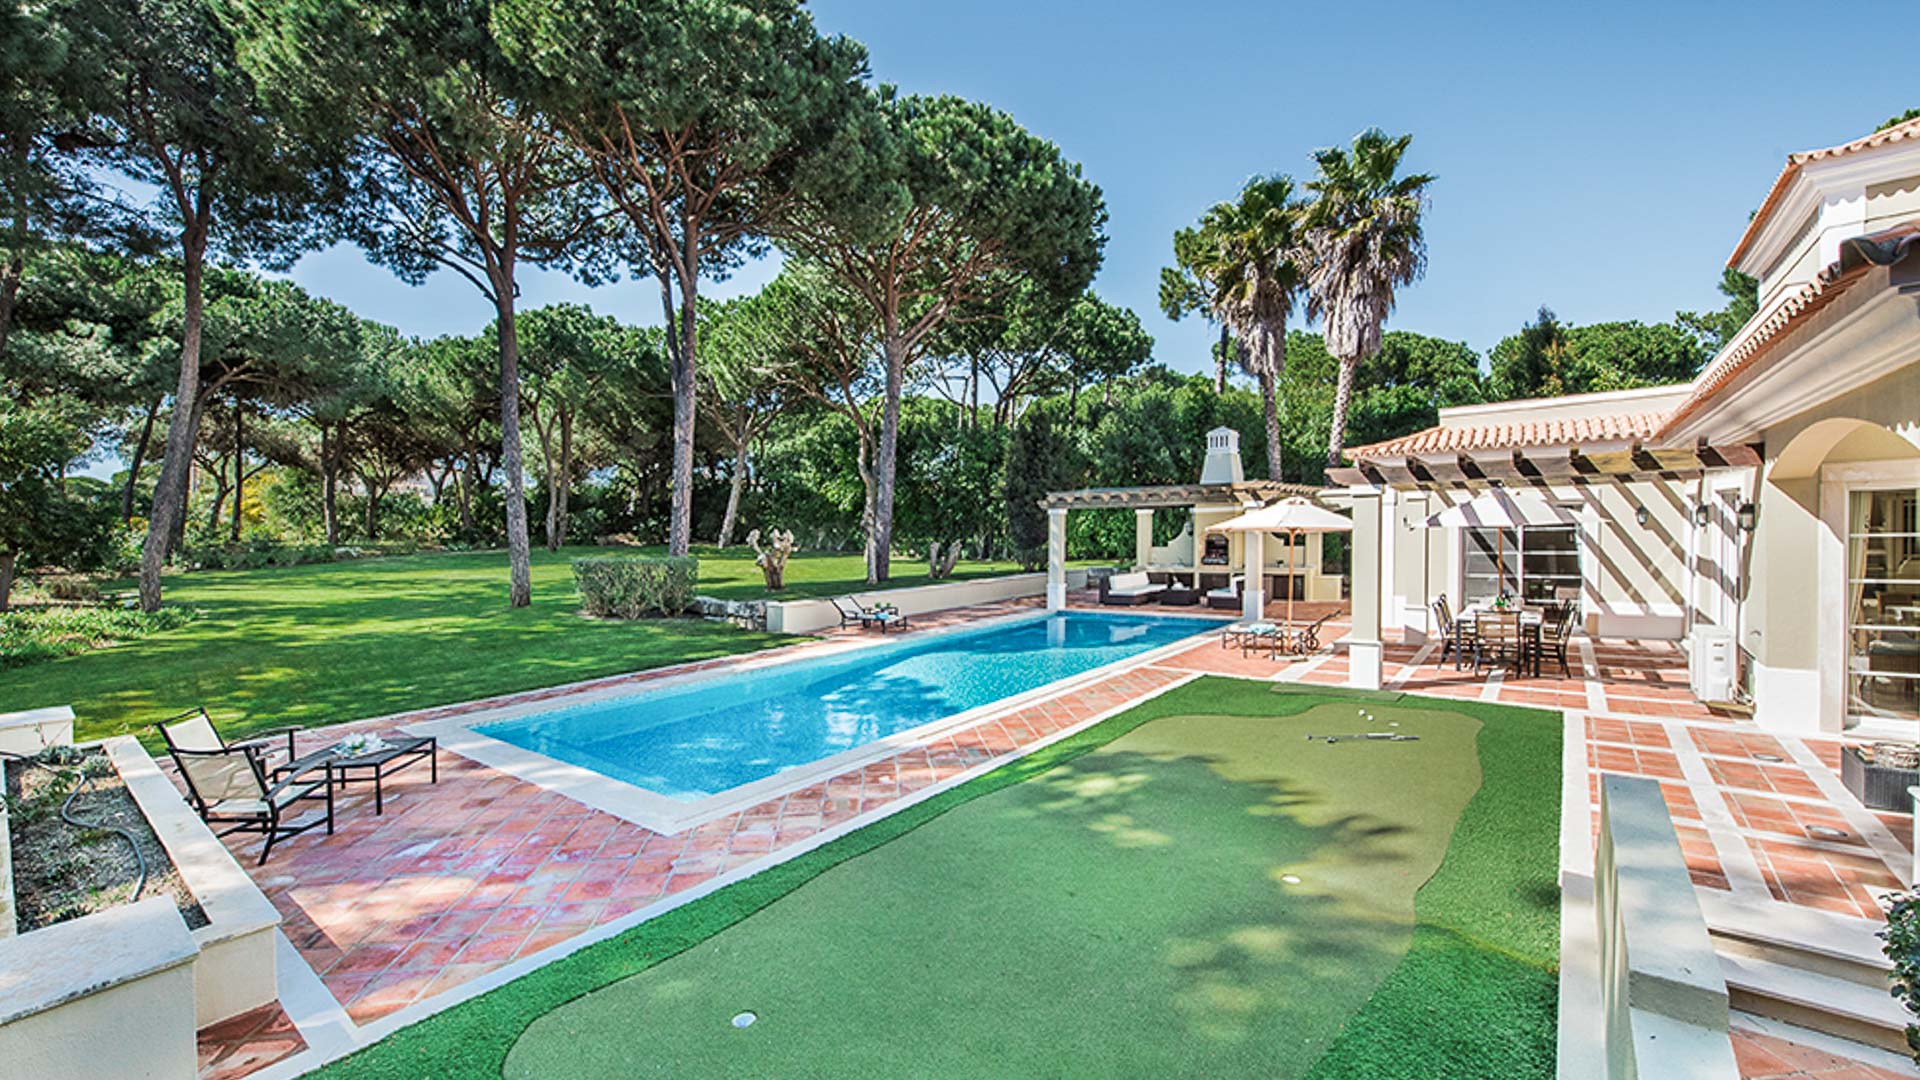 Property Image 2 - Classic Quinta do Lago Villa with Putting Green and Pool